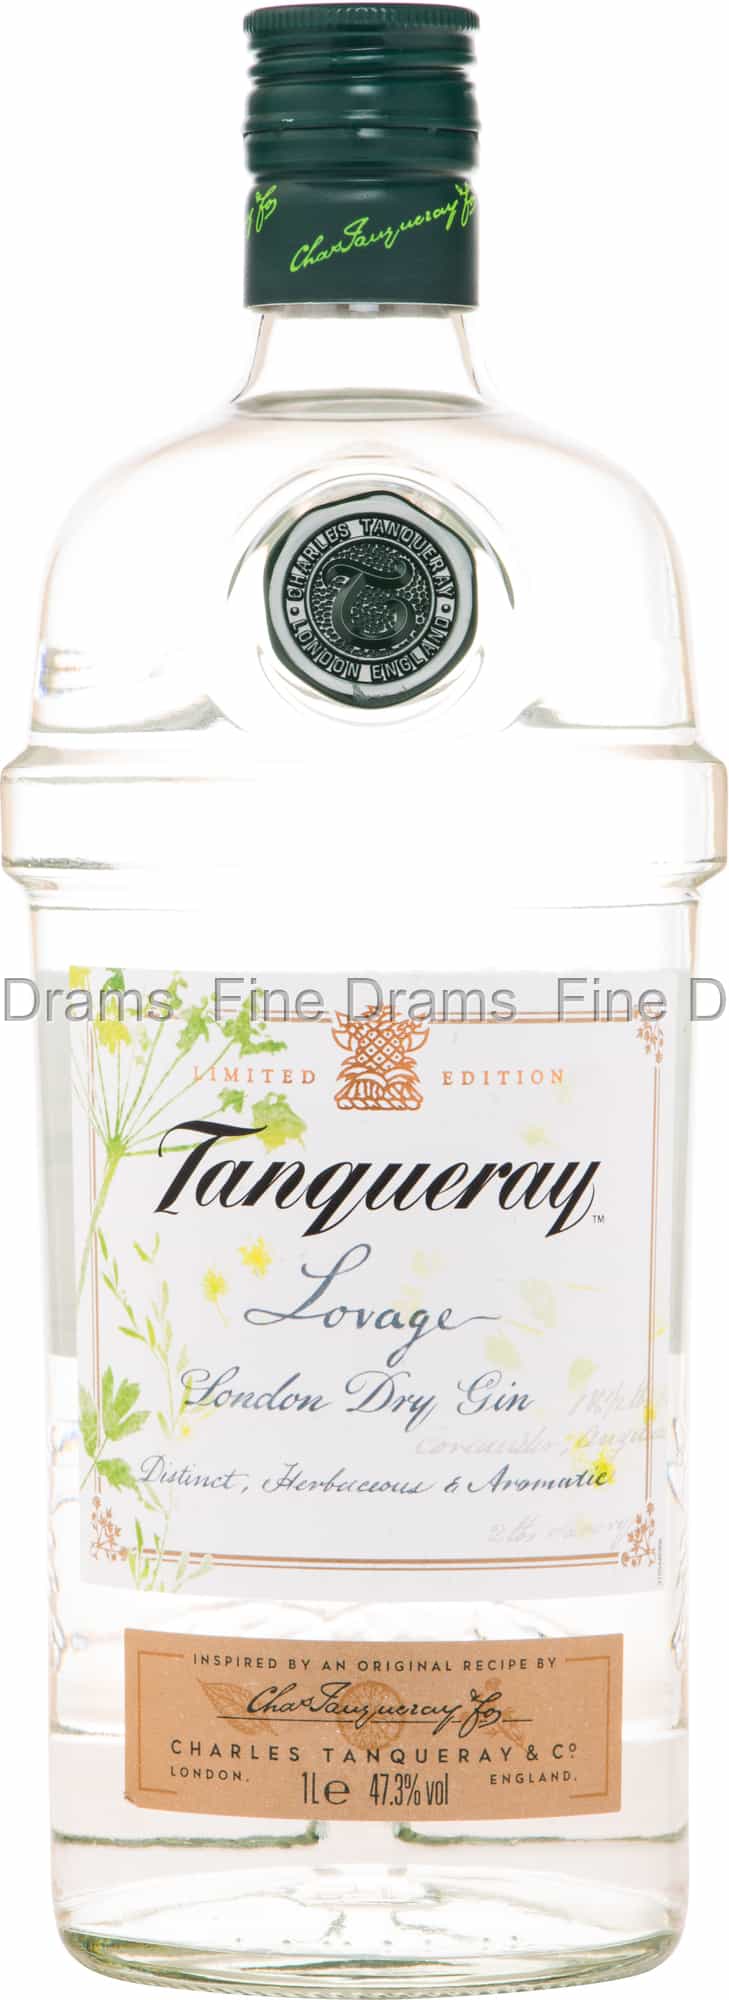 Liter) Lovage Tanqueray Gin (1